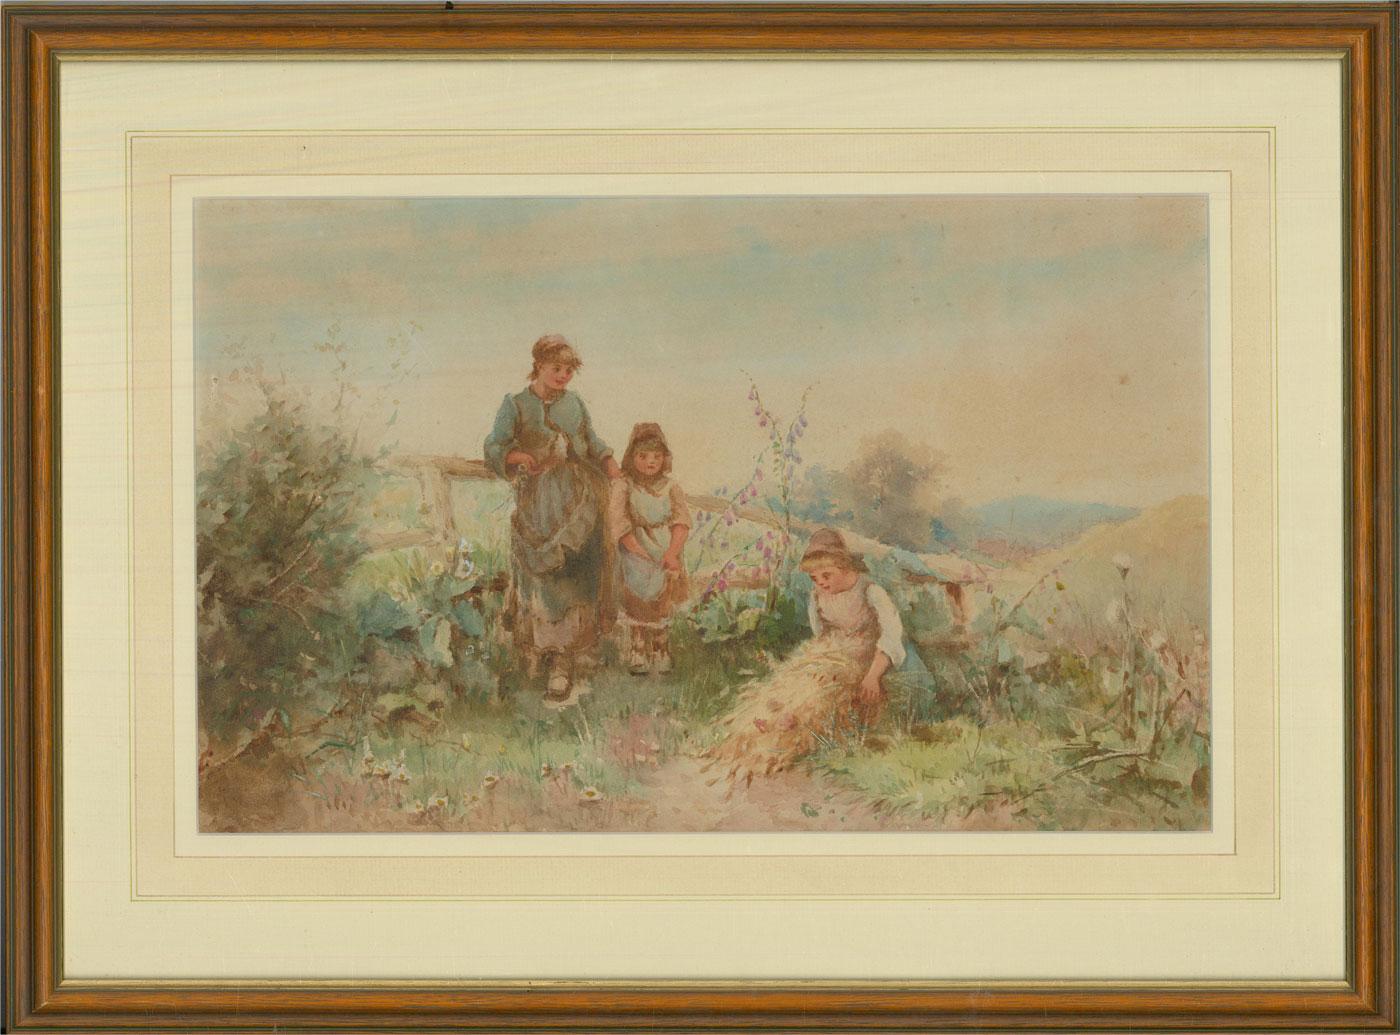 A charming and delicate watercolour study attributed to the British artist Fanny Mearns (fl.1870-1881). The artist has a distinctly delicate technique, using a light palette to depict an idyllic scene. Presented in a wash line mount and simple wood